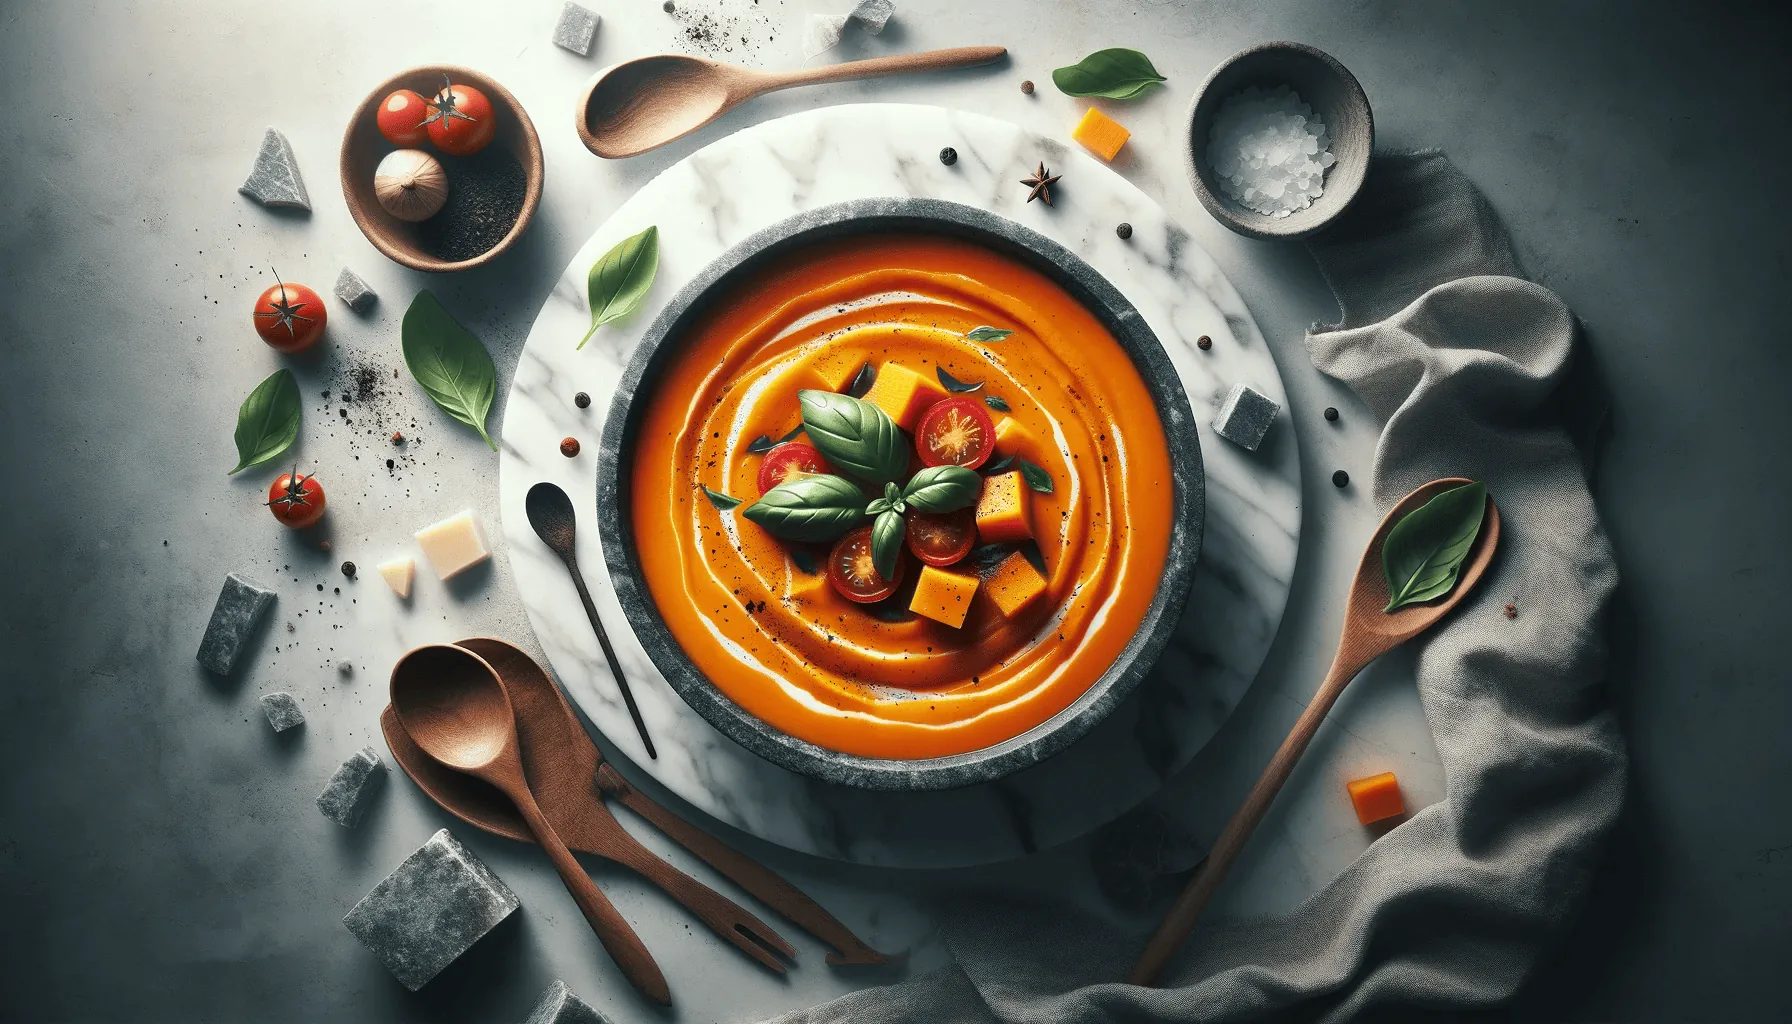 Cozy autumn butternut and tomato soup, ready to serve